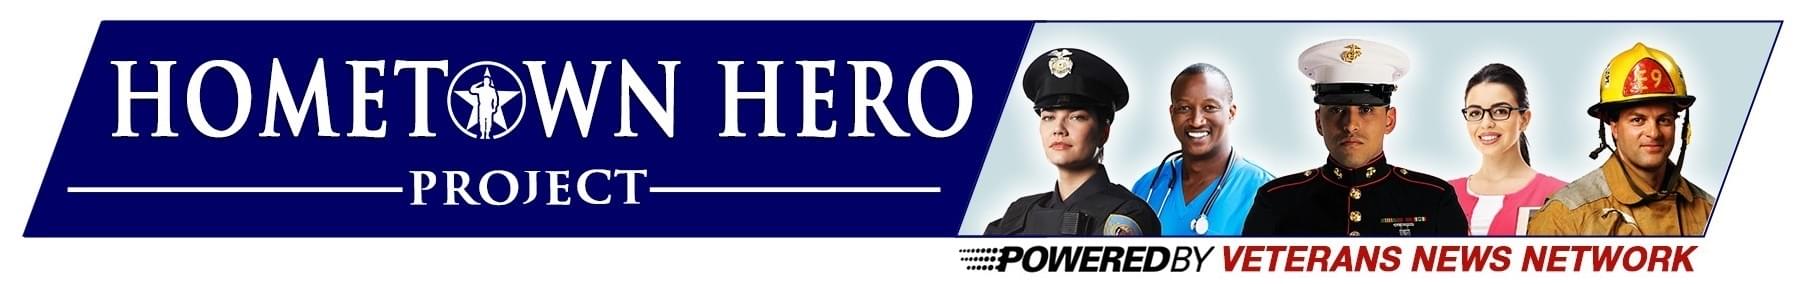 We proudly support our hometown heroes